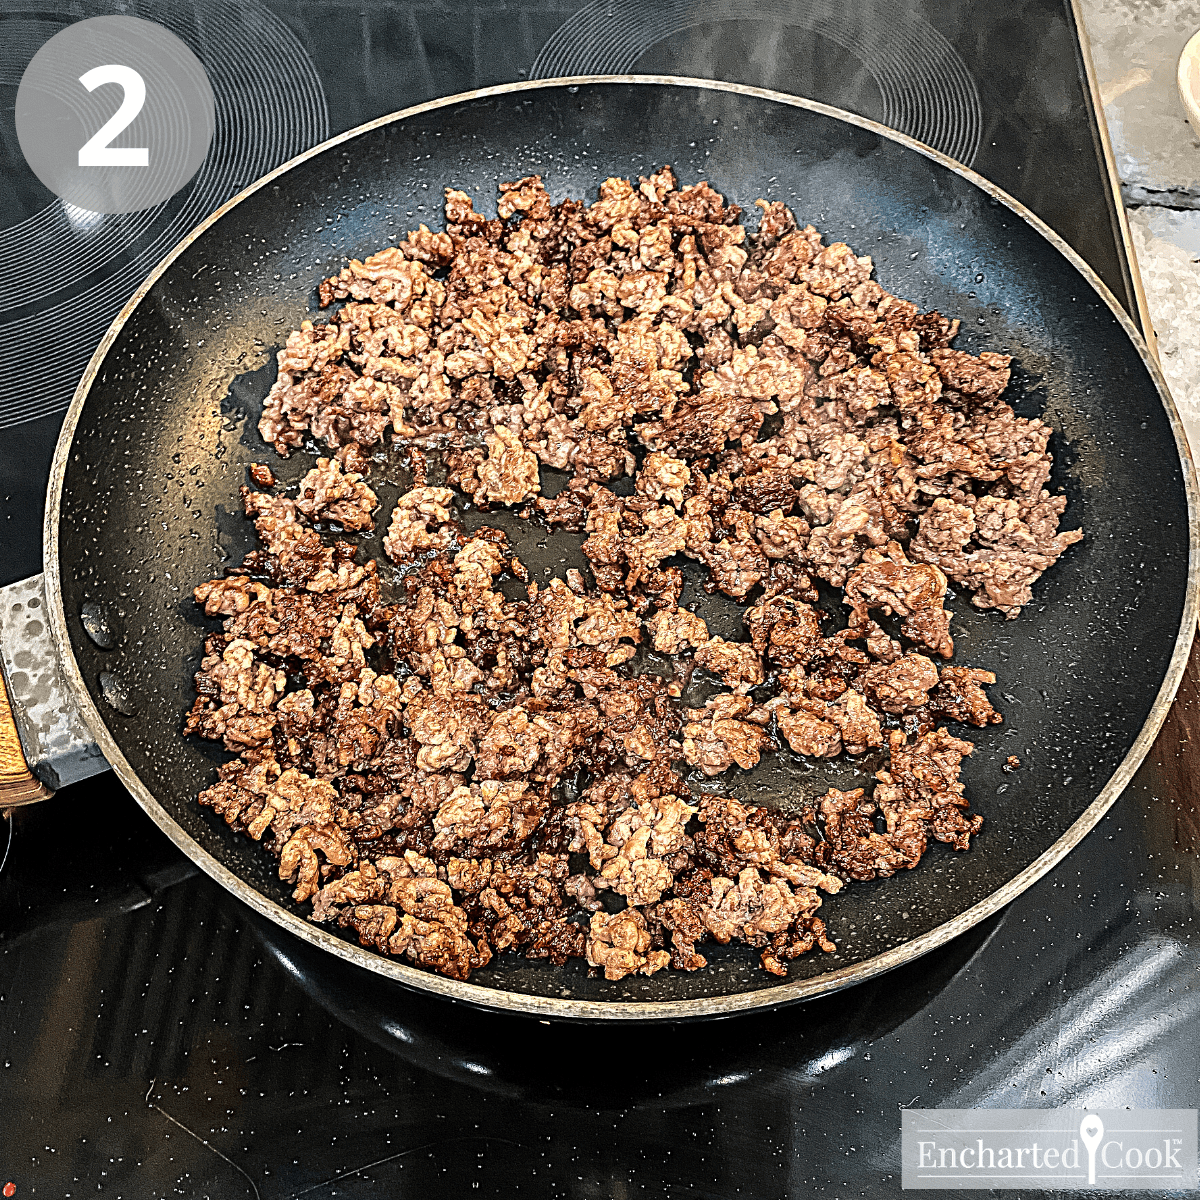 Ground beef is well browned in a skillet on the stove.